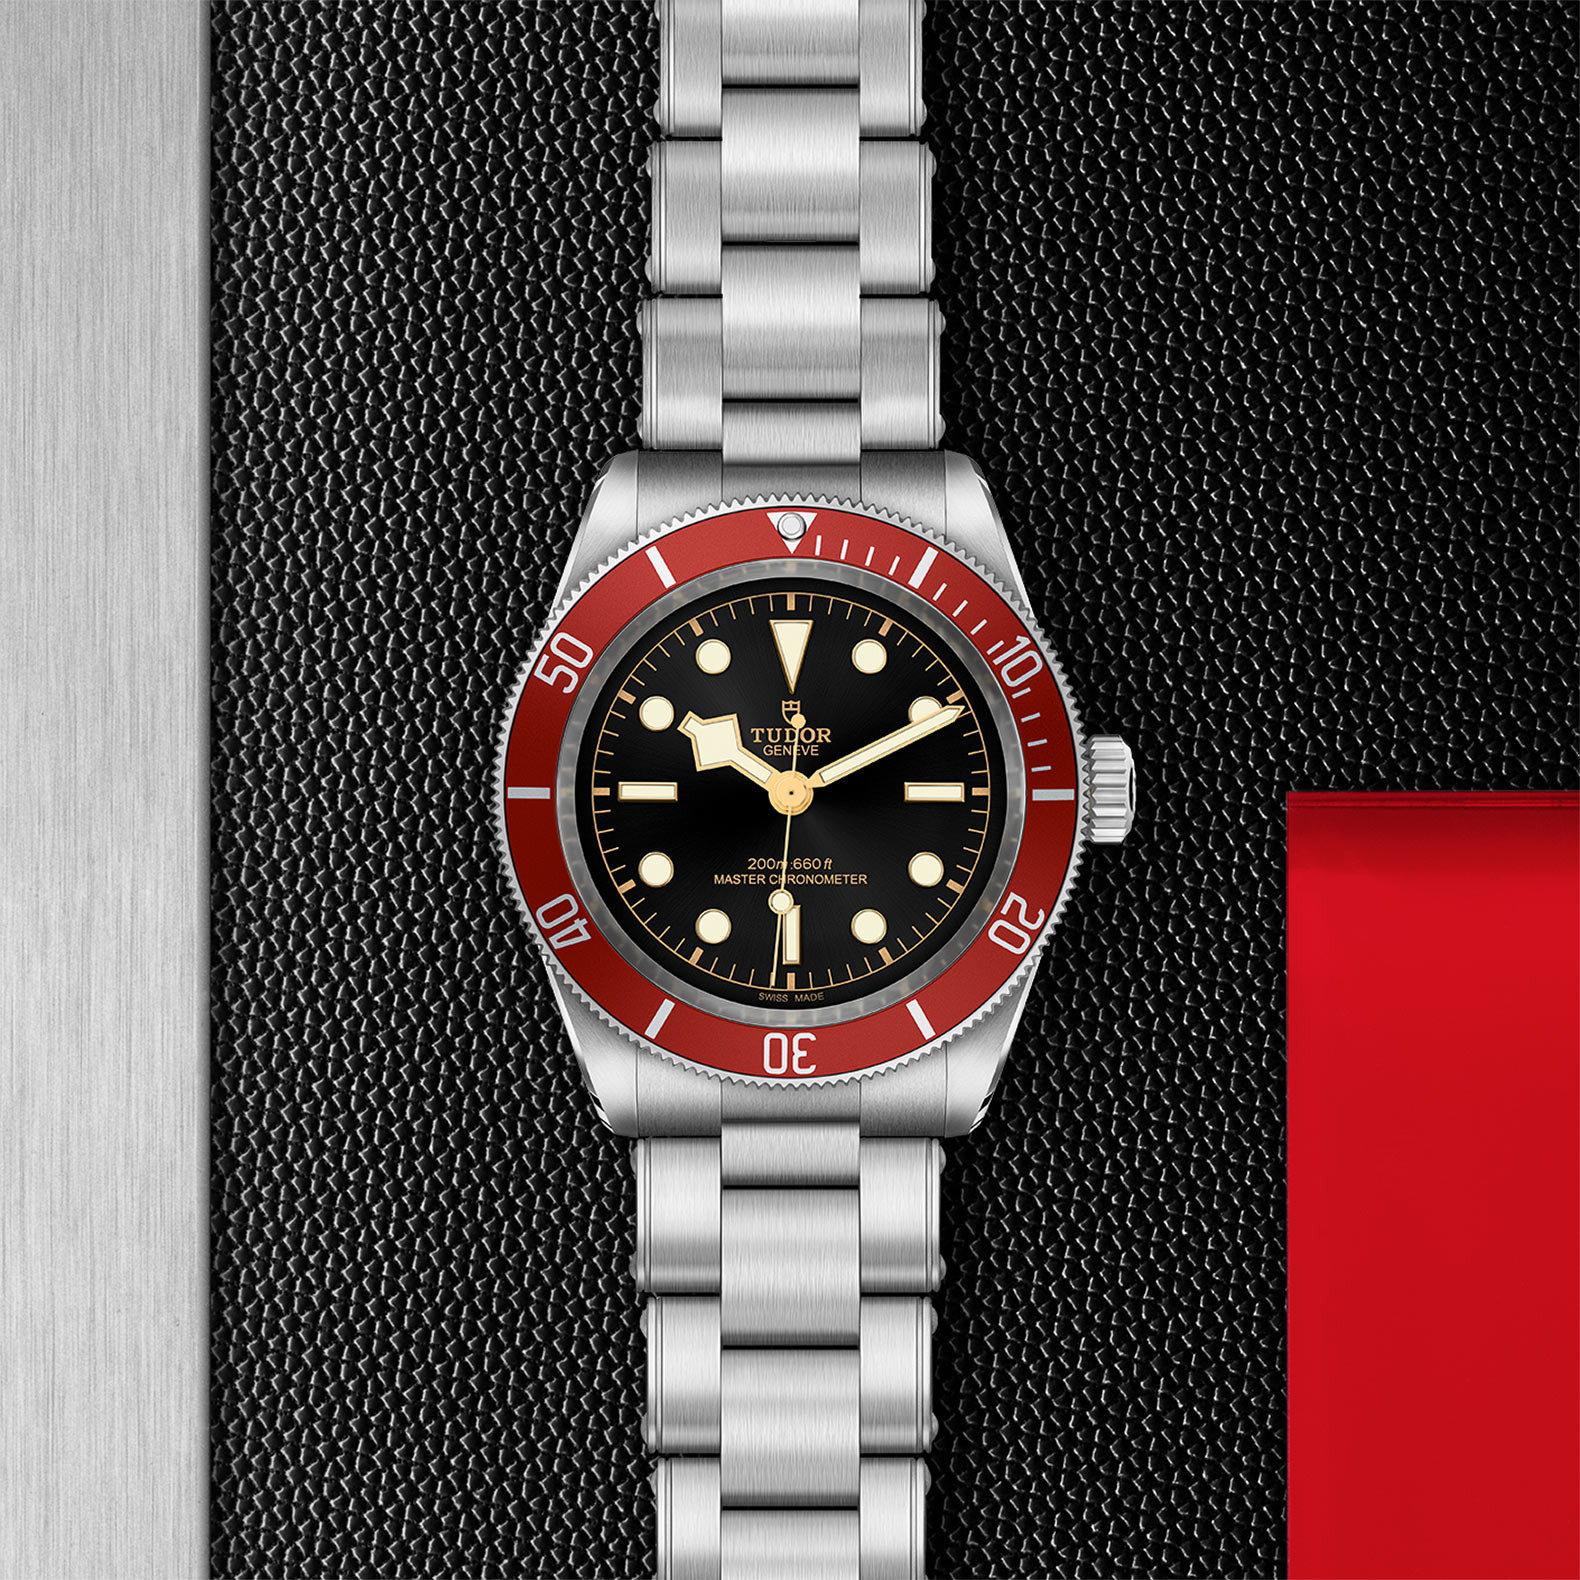 TUDOR Black Bay with 41mm Steel Case and Steel Bracelet M7941A1A0RU-0001 Watch in Store Flat Lay